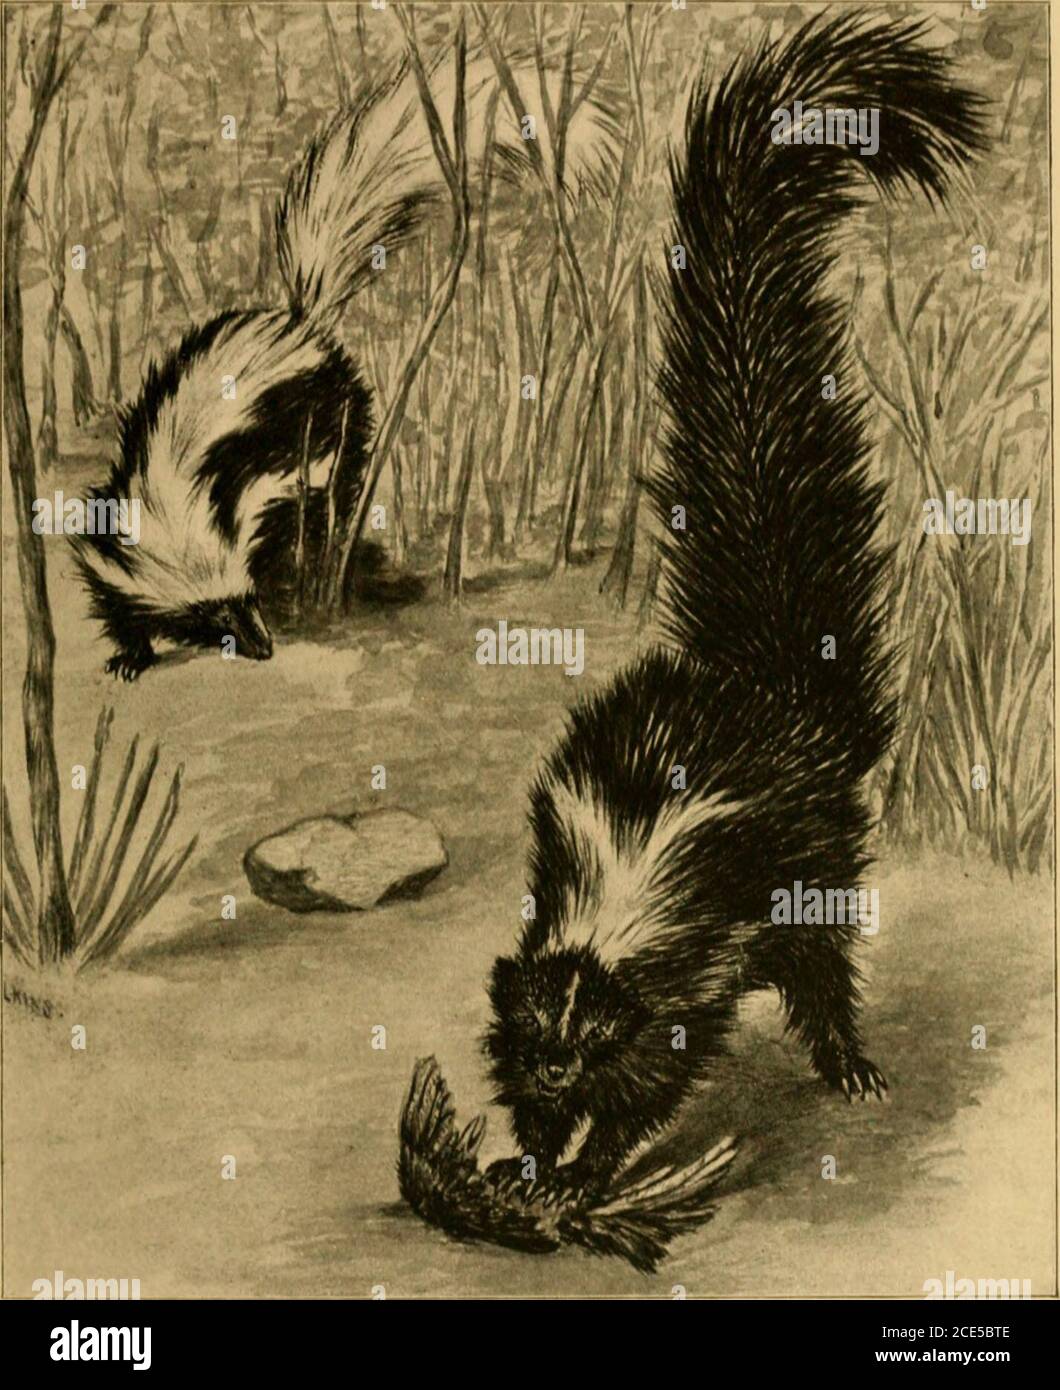 . The land and sea mammals of Middle America and the West Indies . Fig. 95. Mephitis ^Leucomitra^ macrura. No. SuS.; lioKl CohiuilMaiilMus. Coll. Nat. si/e. 180. macrura {Mephitis), Licht.. Darst. Saugoth.. i8^u. pl- &gt;^lvi.LoNC.-TAiLHO Skvxk. ZorUlo in Mexico, applied to all skunks. Type locality. ? Mexico. Gcnl. Clhu. Tail neaiiv as long as body. Color. Hlaek; a broad nuchal patch extending as a broad stnpeto end of tail white; longitudinal white stripe on each side. Moositronciits. Total length. 0S5; tail vertebra ;,,;j. Skull: MhPHITIS. occipito-nasal Icnj^tli, 57; ilcnsfl, ^y, zyjj[oni Stock Photo